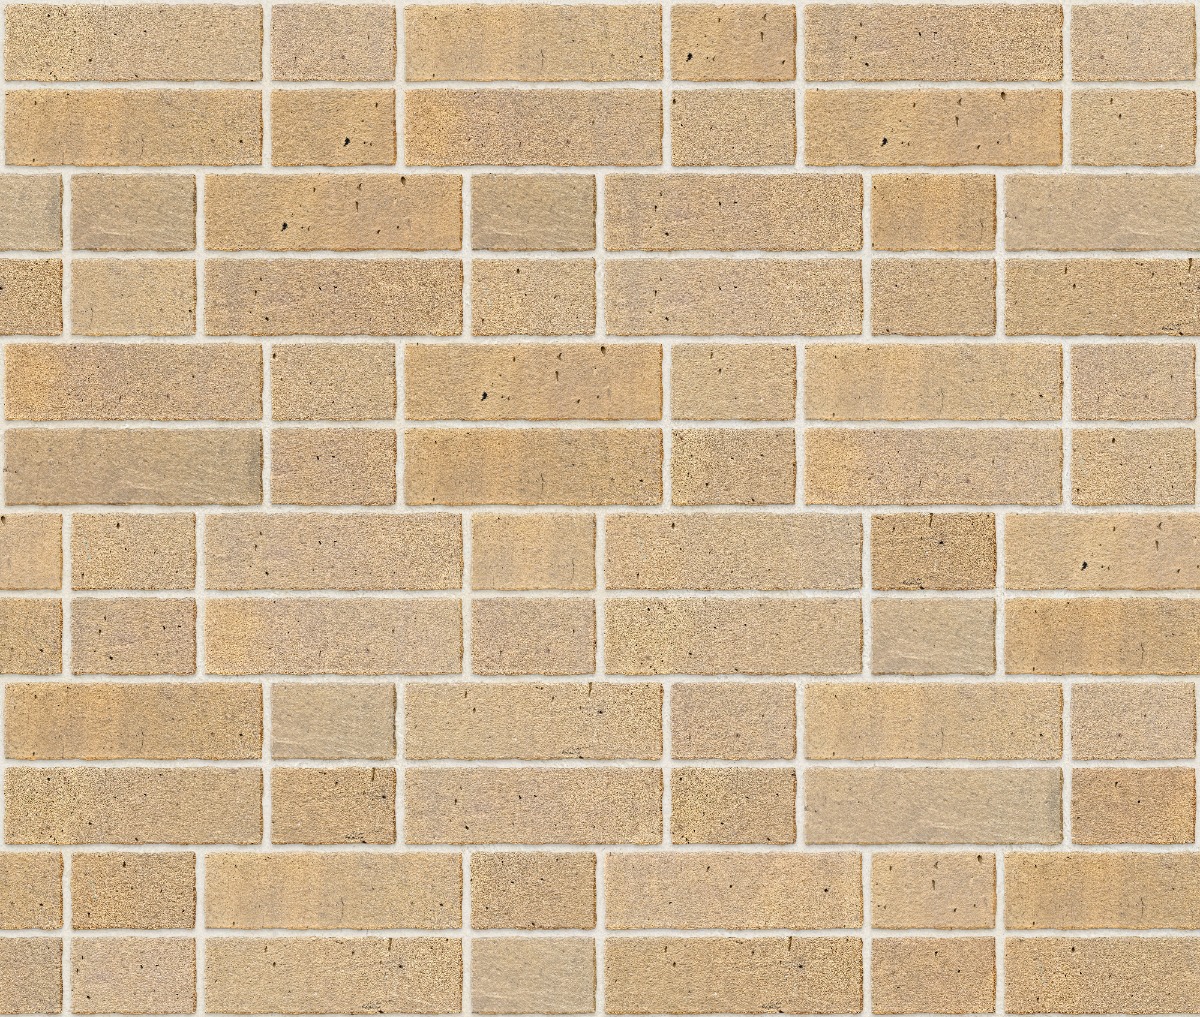 A seamless brick texture with hooff brick units arranged in a Double Flemish pattern